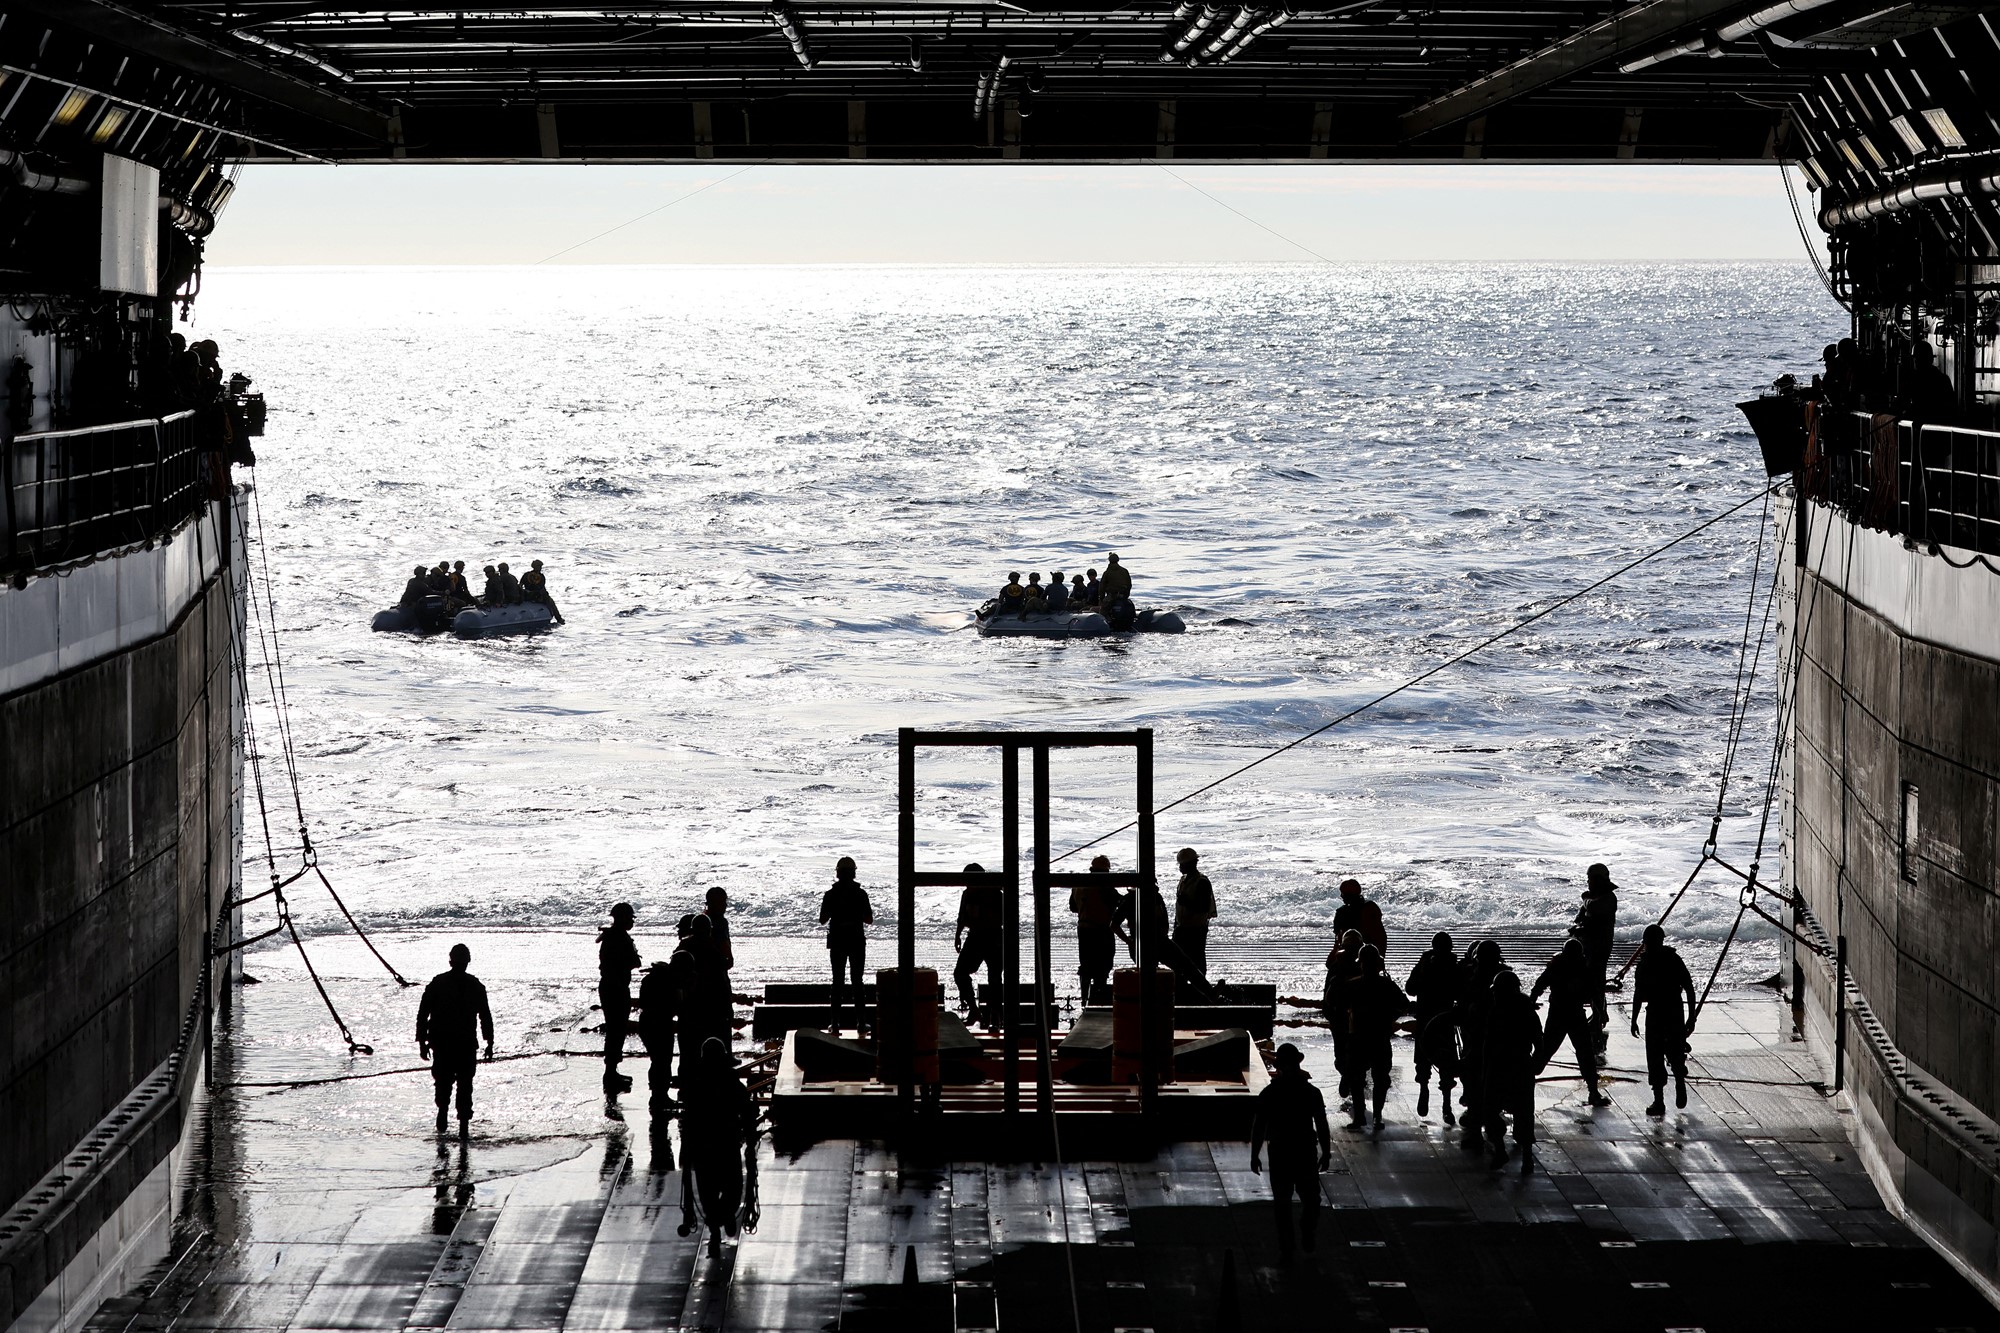 US Navy men lead a boat into th ocean out of a ship hangar. 